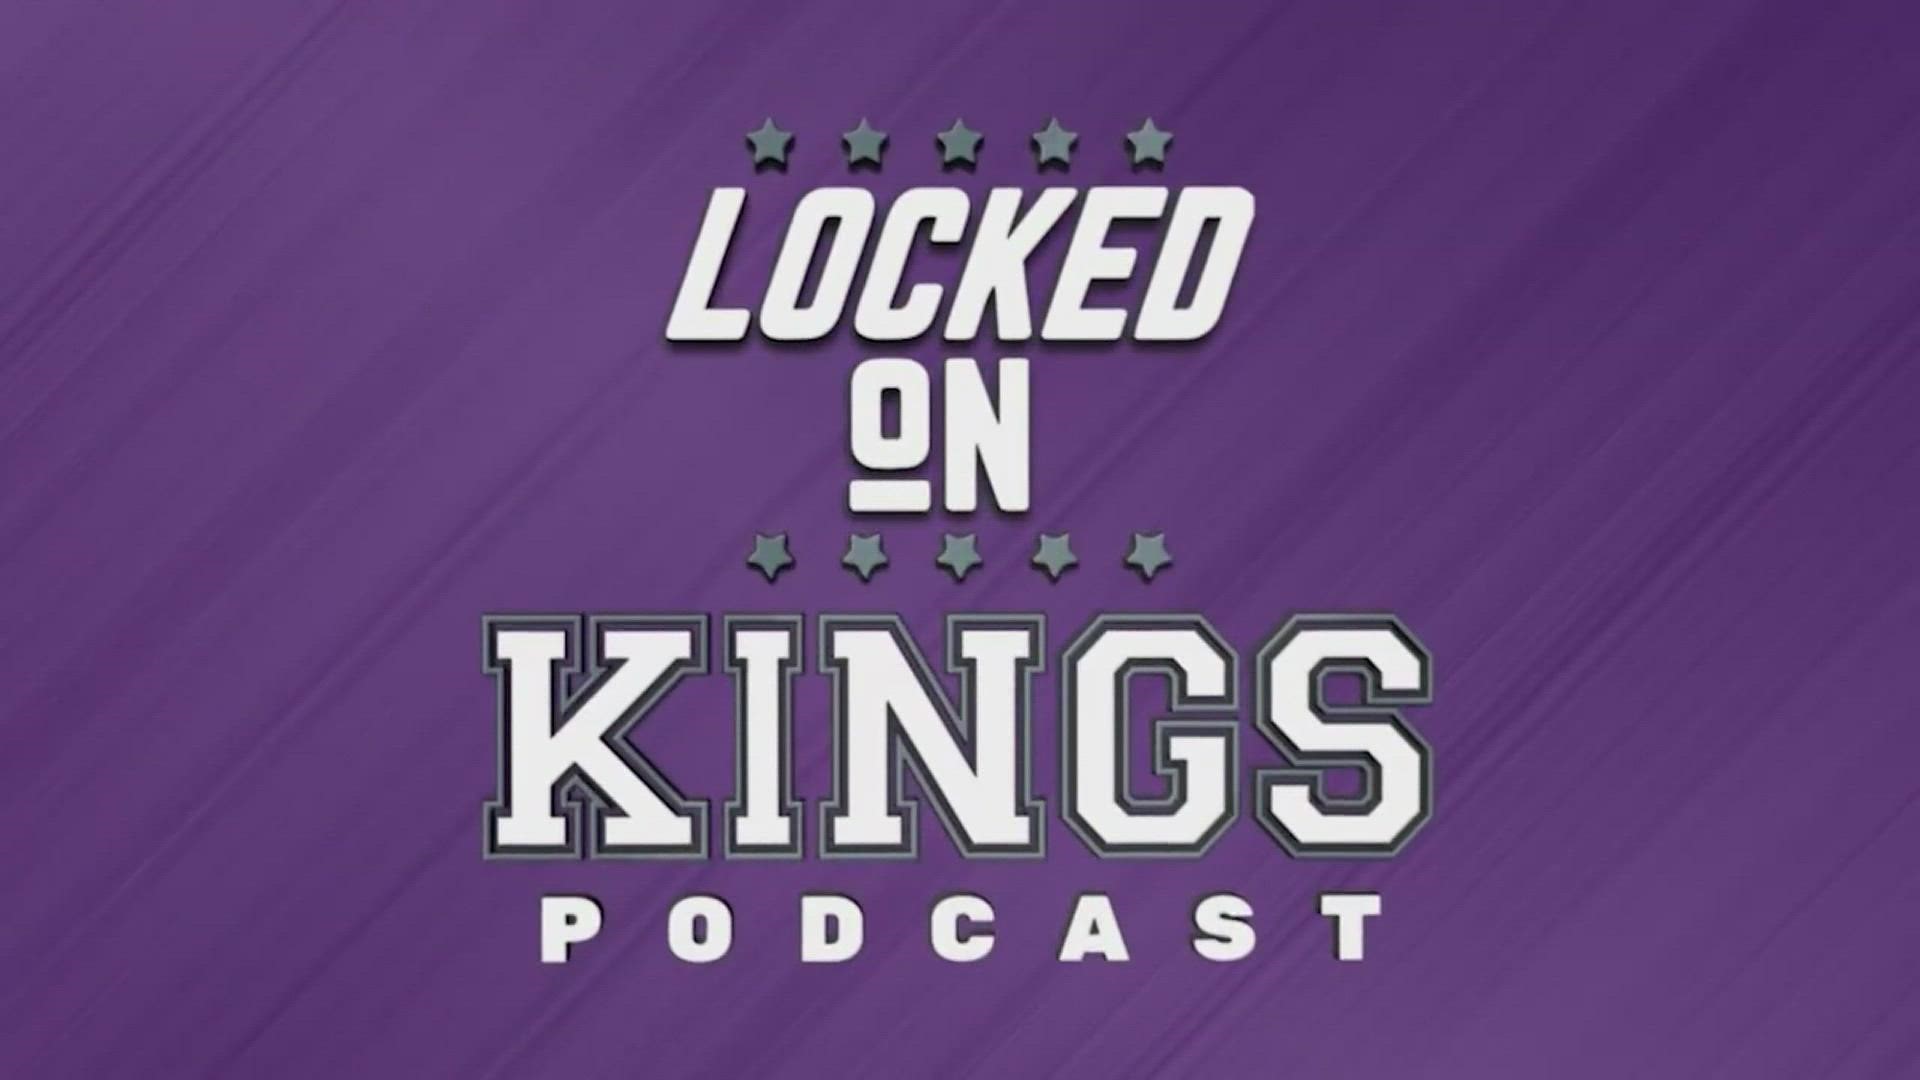 Matt George reacts to the wild finish of the Sacramento Kings' win in Houston, Keegan Murray's winning plays as a rookie, and the successful seven game road trip.